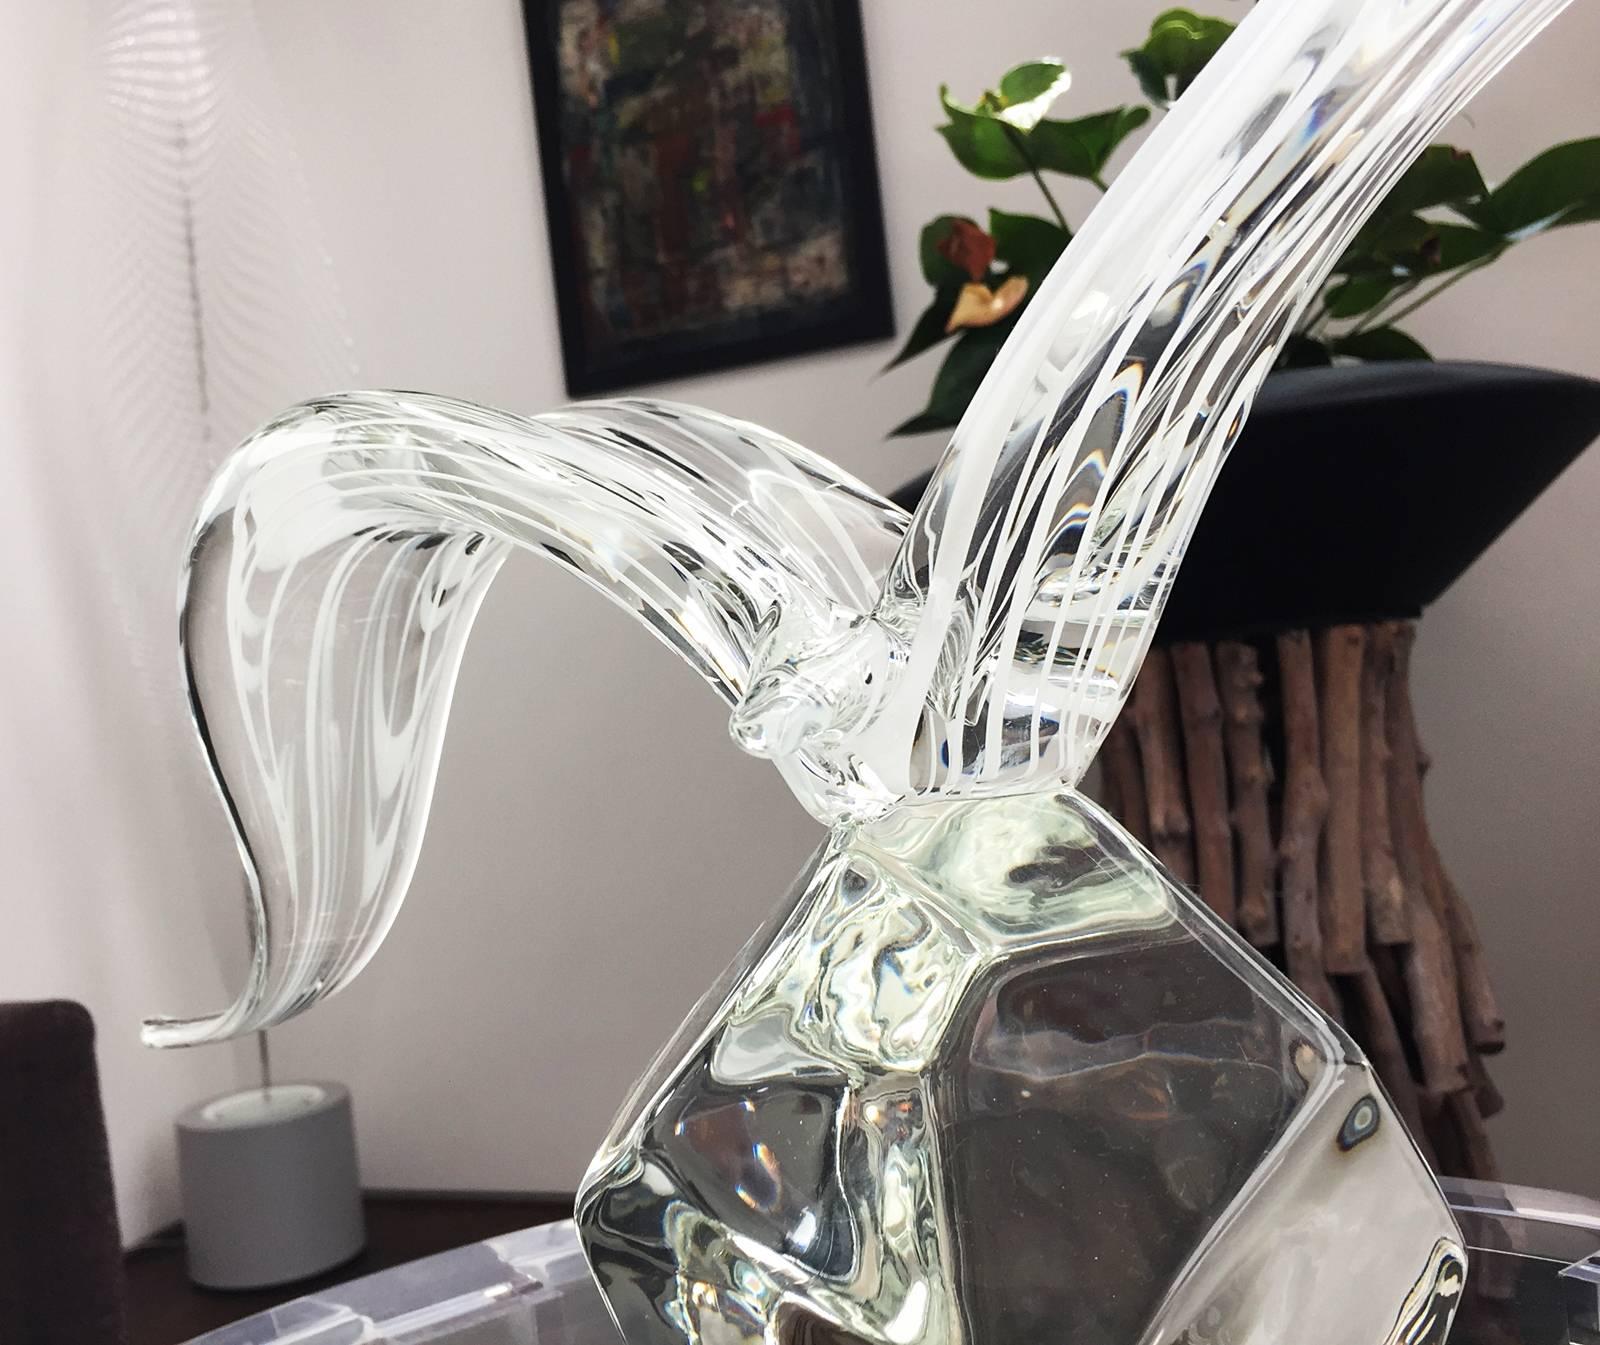 A Licio Zanetti Murano bird sculpture. This sculpture depicts a bird with outstretched, curved wings with white lines running through it perched atop a geometric shaped bottom. The base of this sculpture is hand signed.
Measurements:
24.0